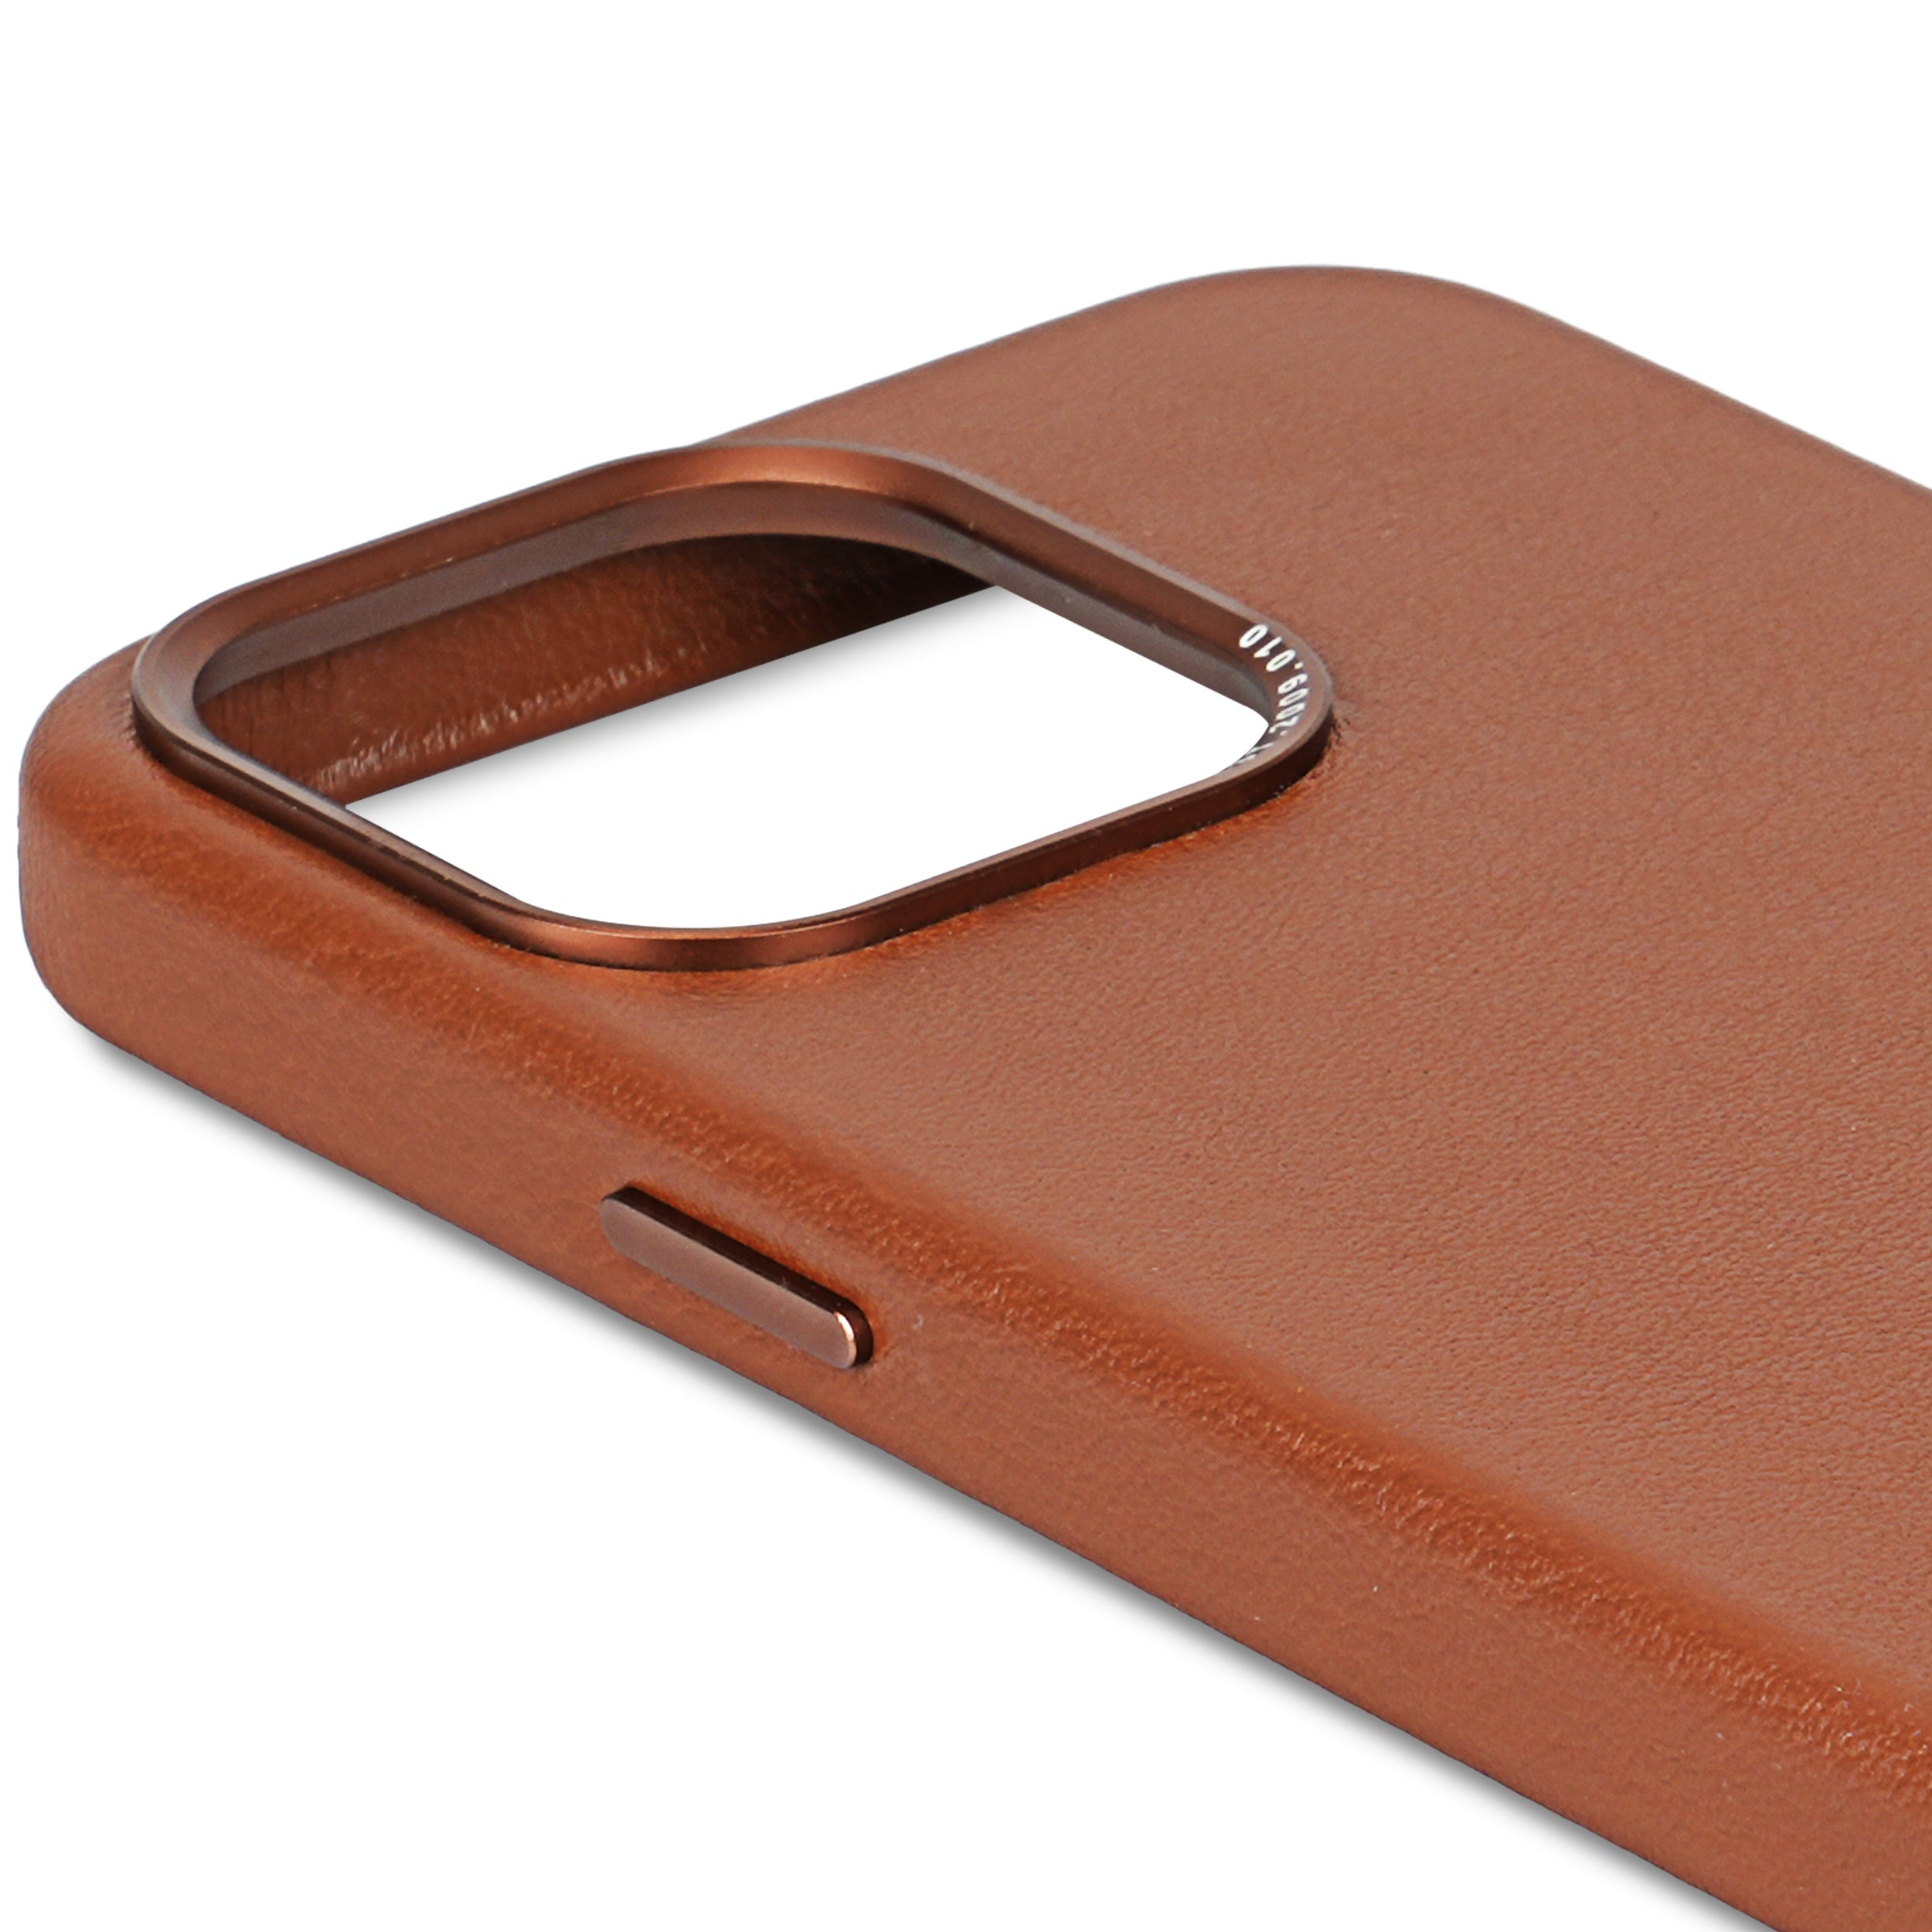 iPhone 15 Pro Max Leather Back Cover Tan